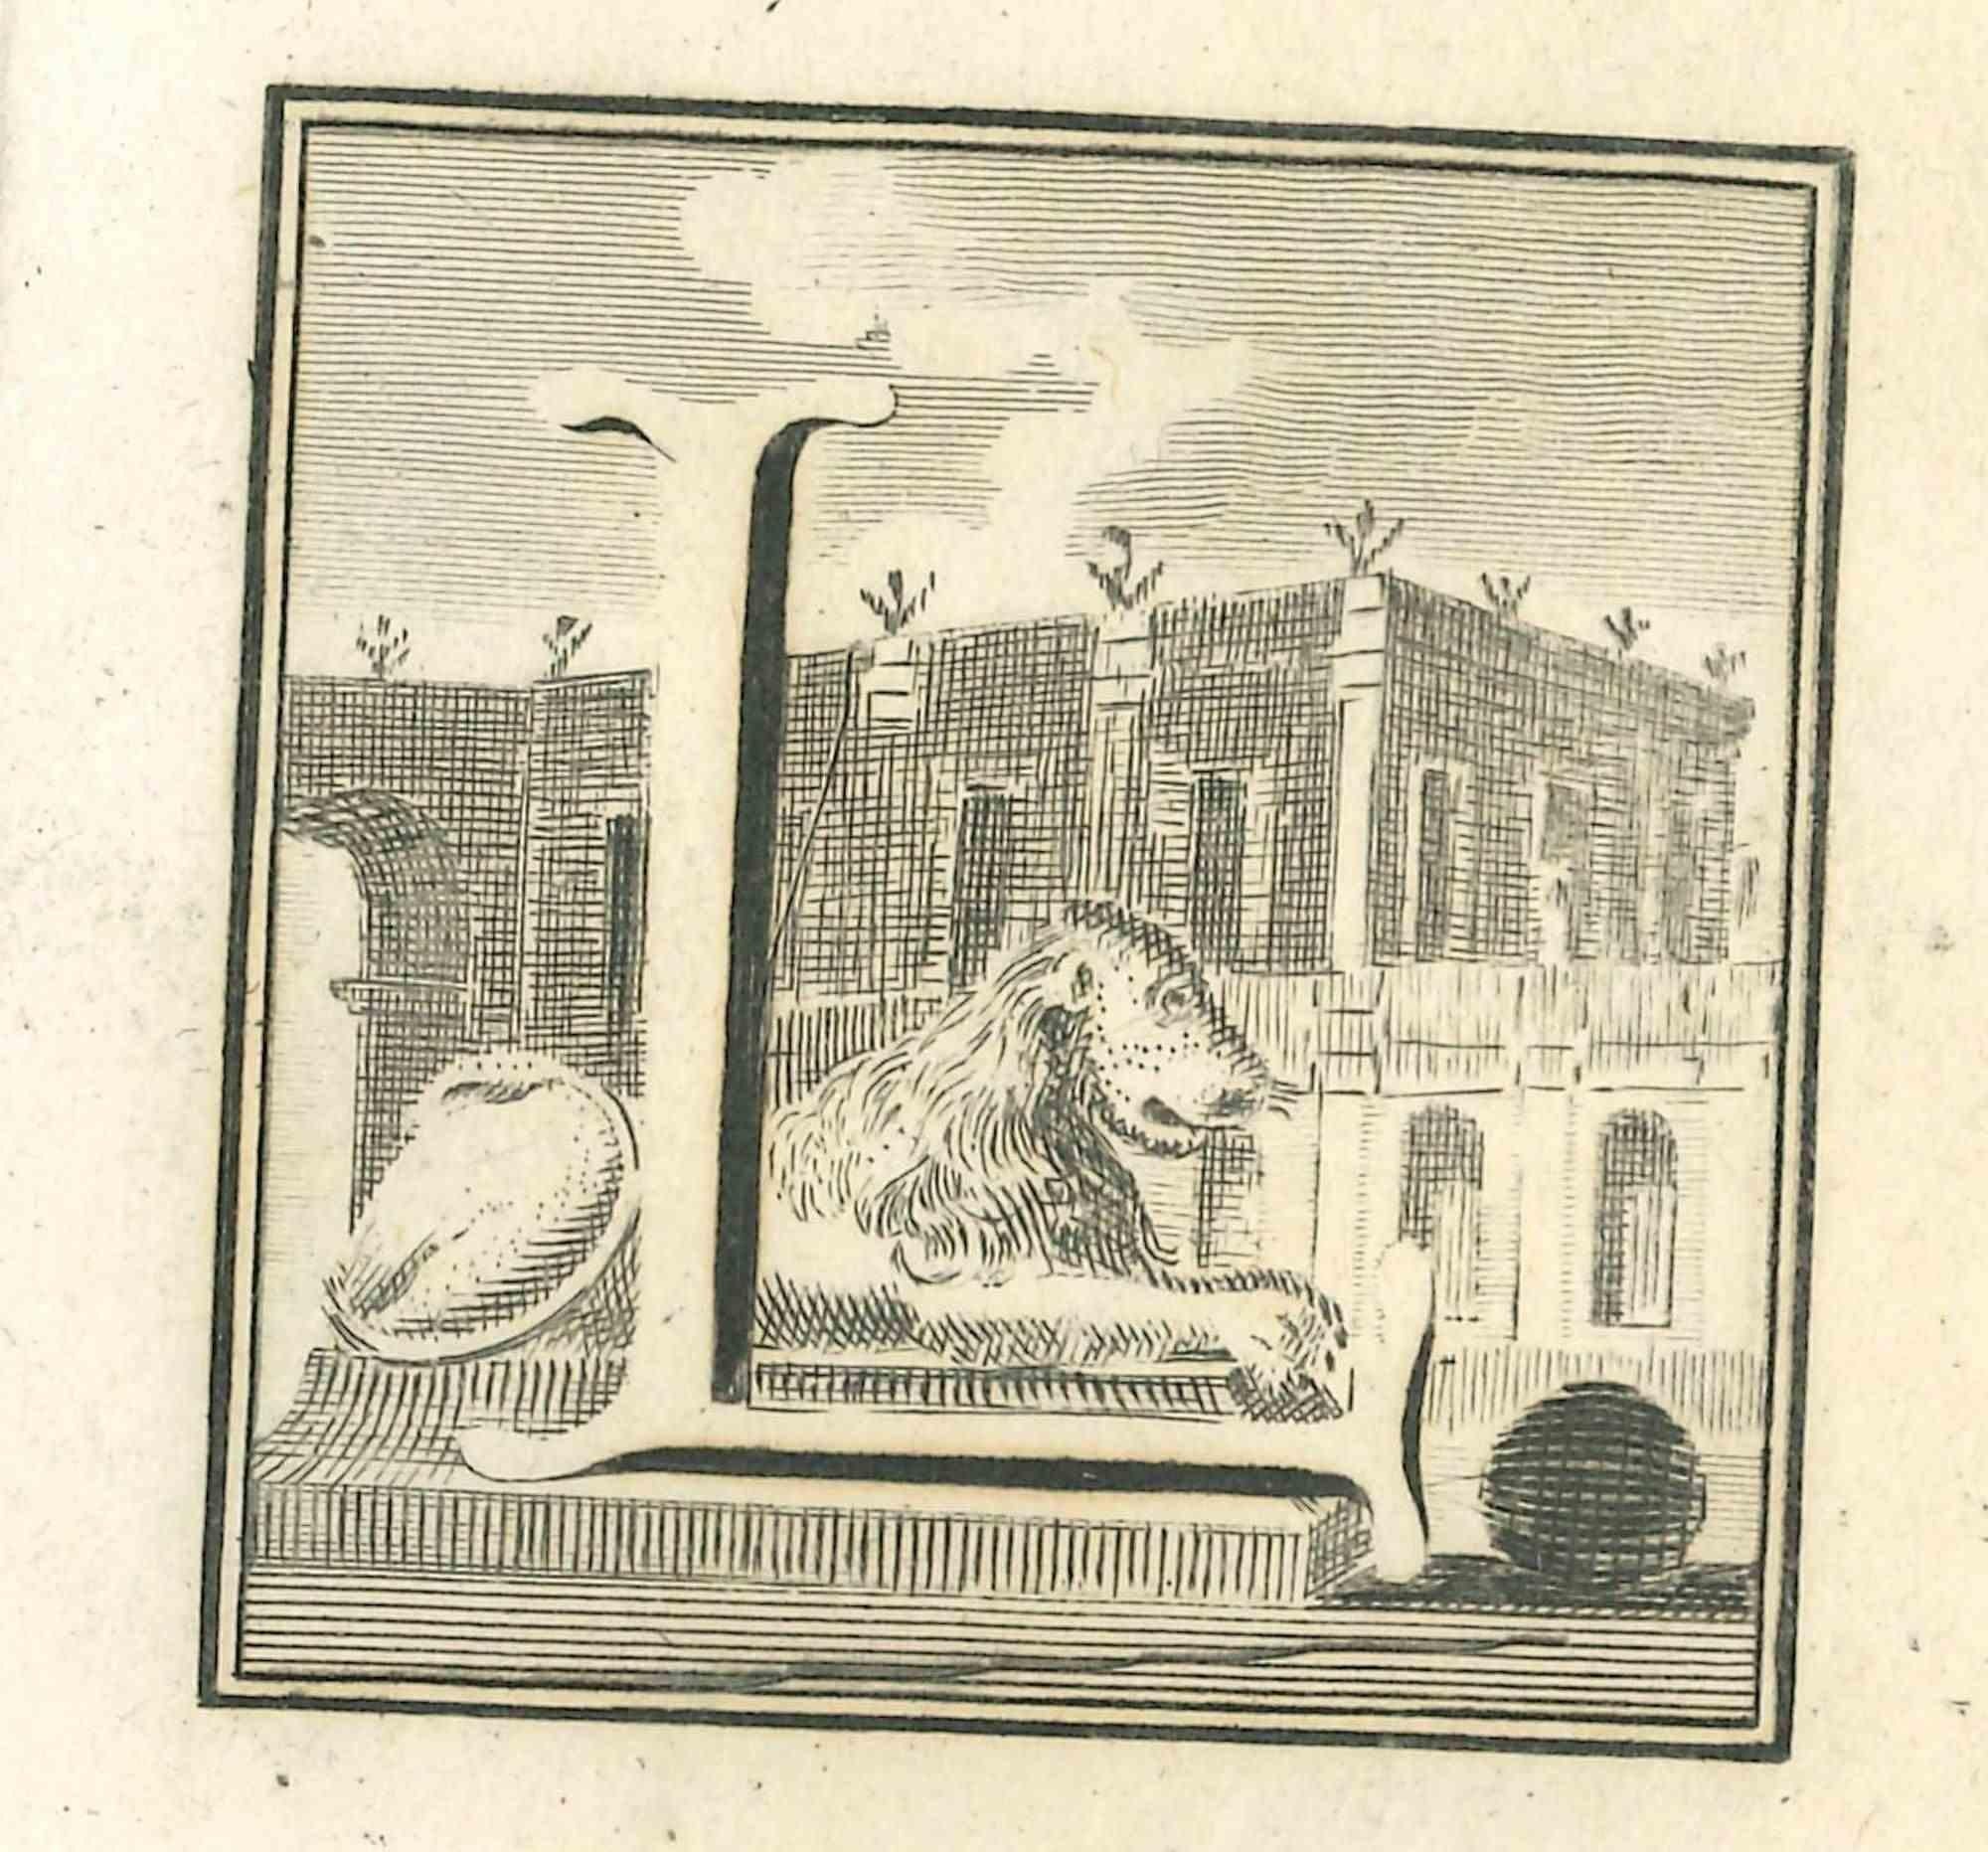 Letter of the Alphabet L,  from the series "Antiquities of Herculaneum", is an etching on paper realized by Luigi Vanvitelli in the 18th century.

Good conditions.

The etching belongs to the print suite “Antiquities of Herculaneum Exposed”